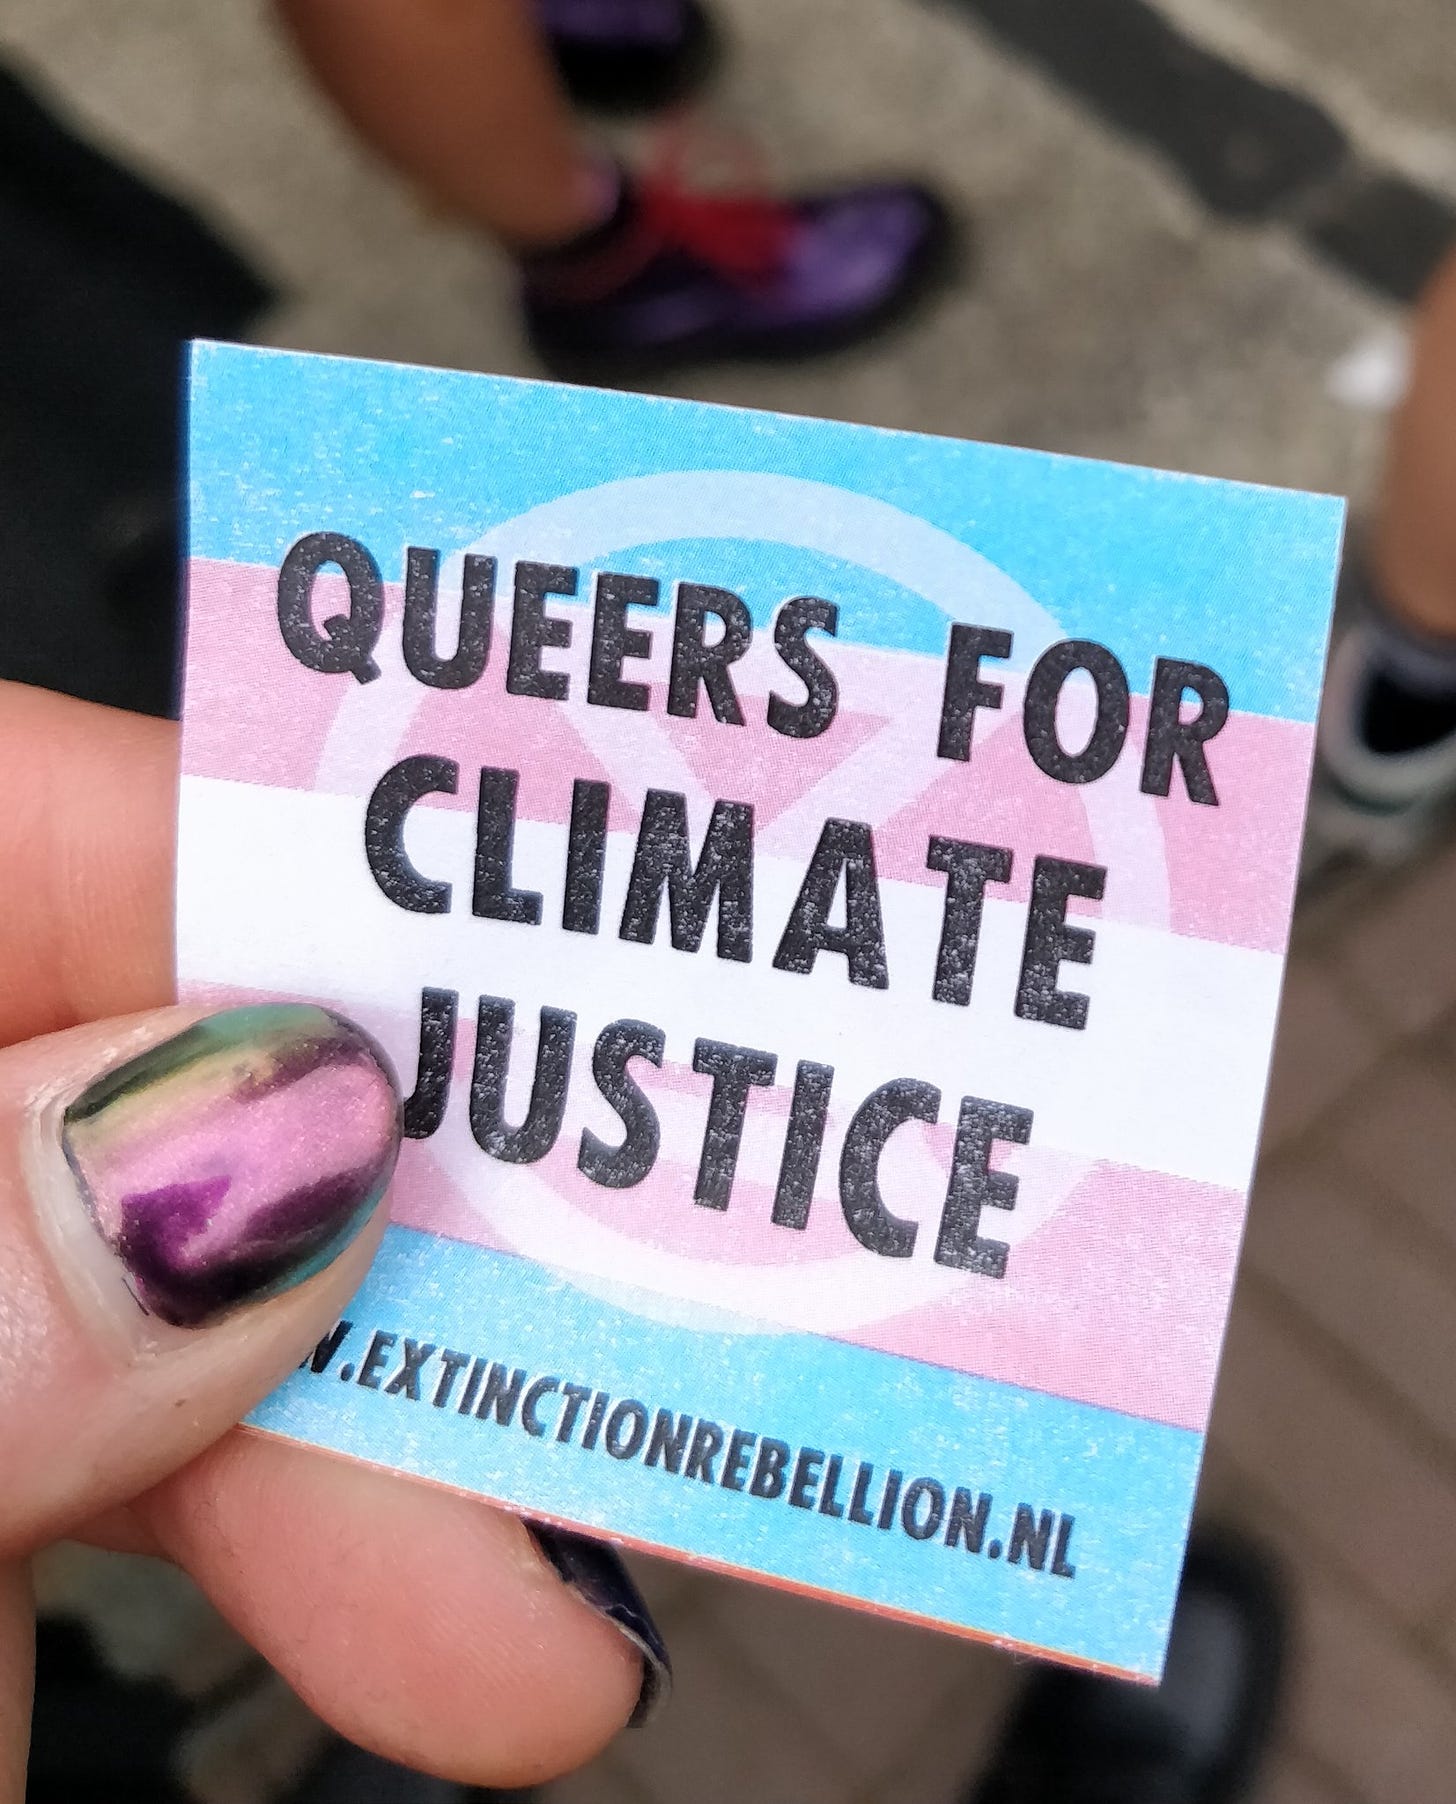 A hand holds a sticker that says 'Queers for Climate Justice' with a link to www.extinctionrebellion.nl at the bottom